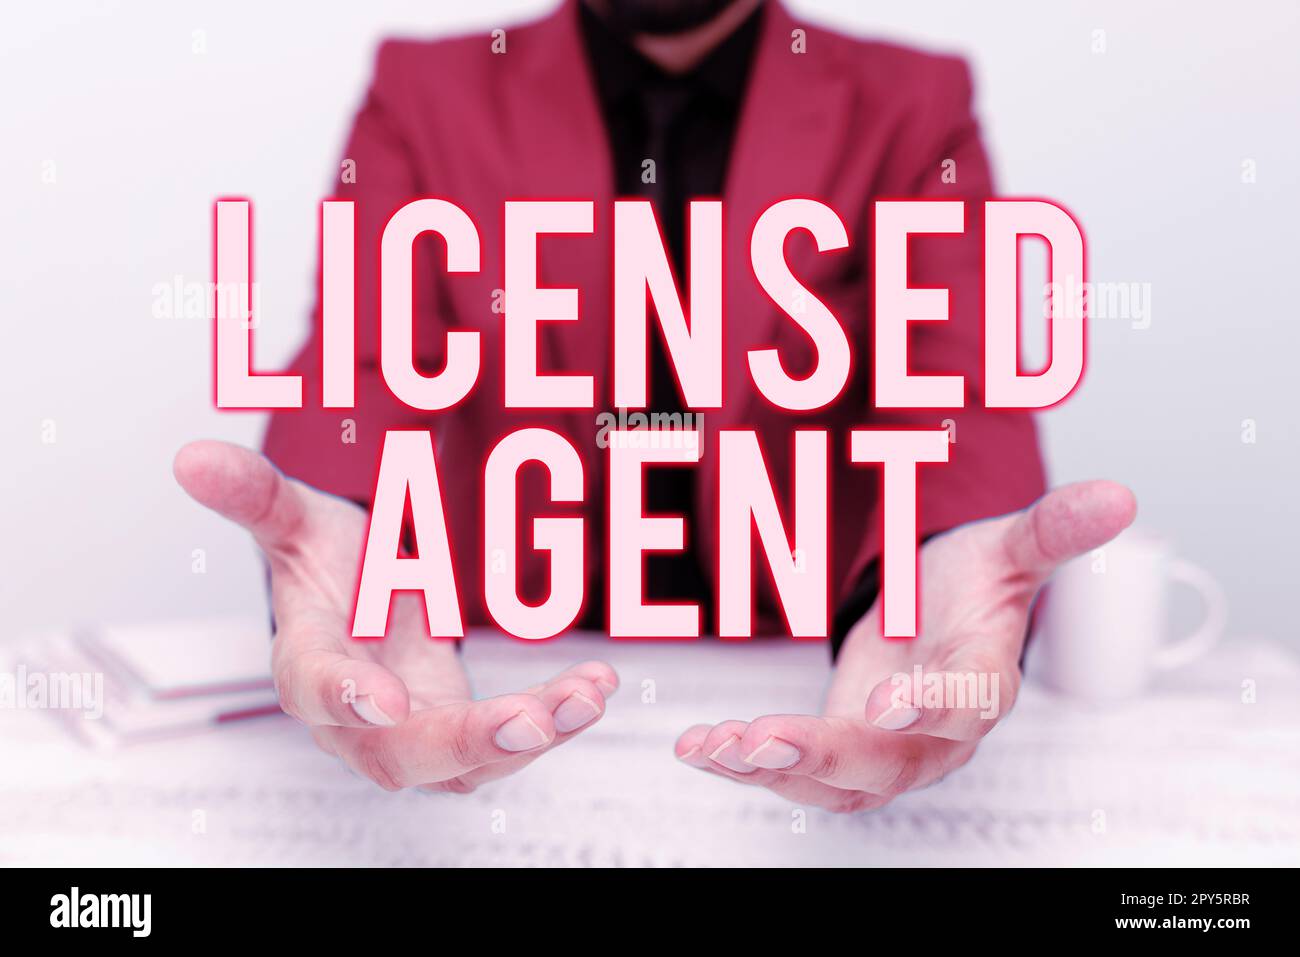 Text sign showing Licensed Agent. Business approach Authorized and Accredited seller of insurance policies Stock Photo